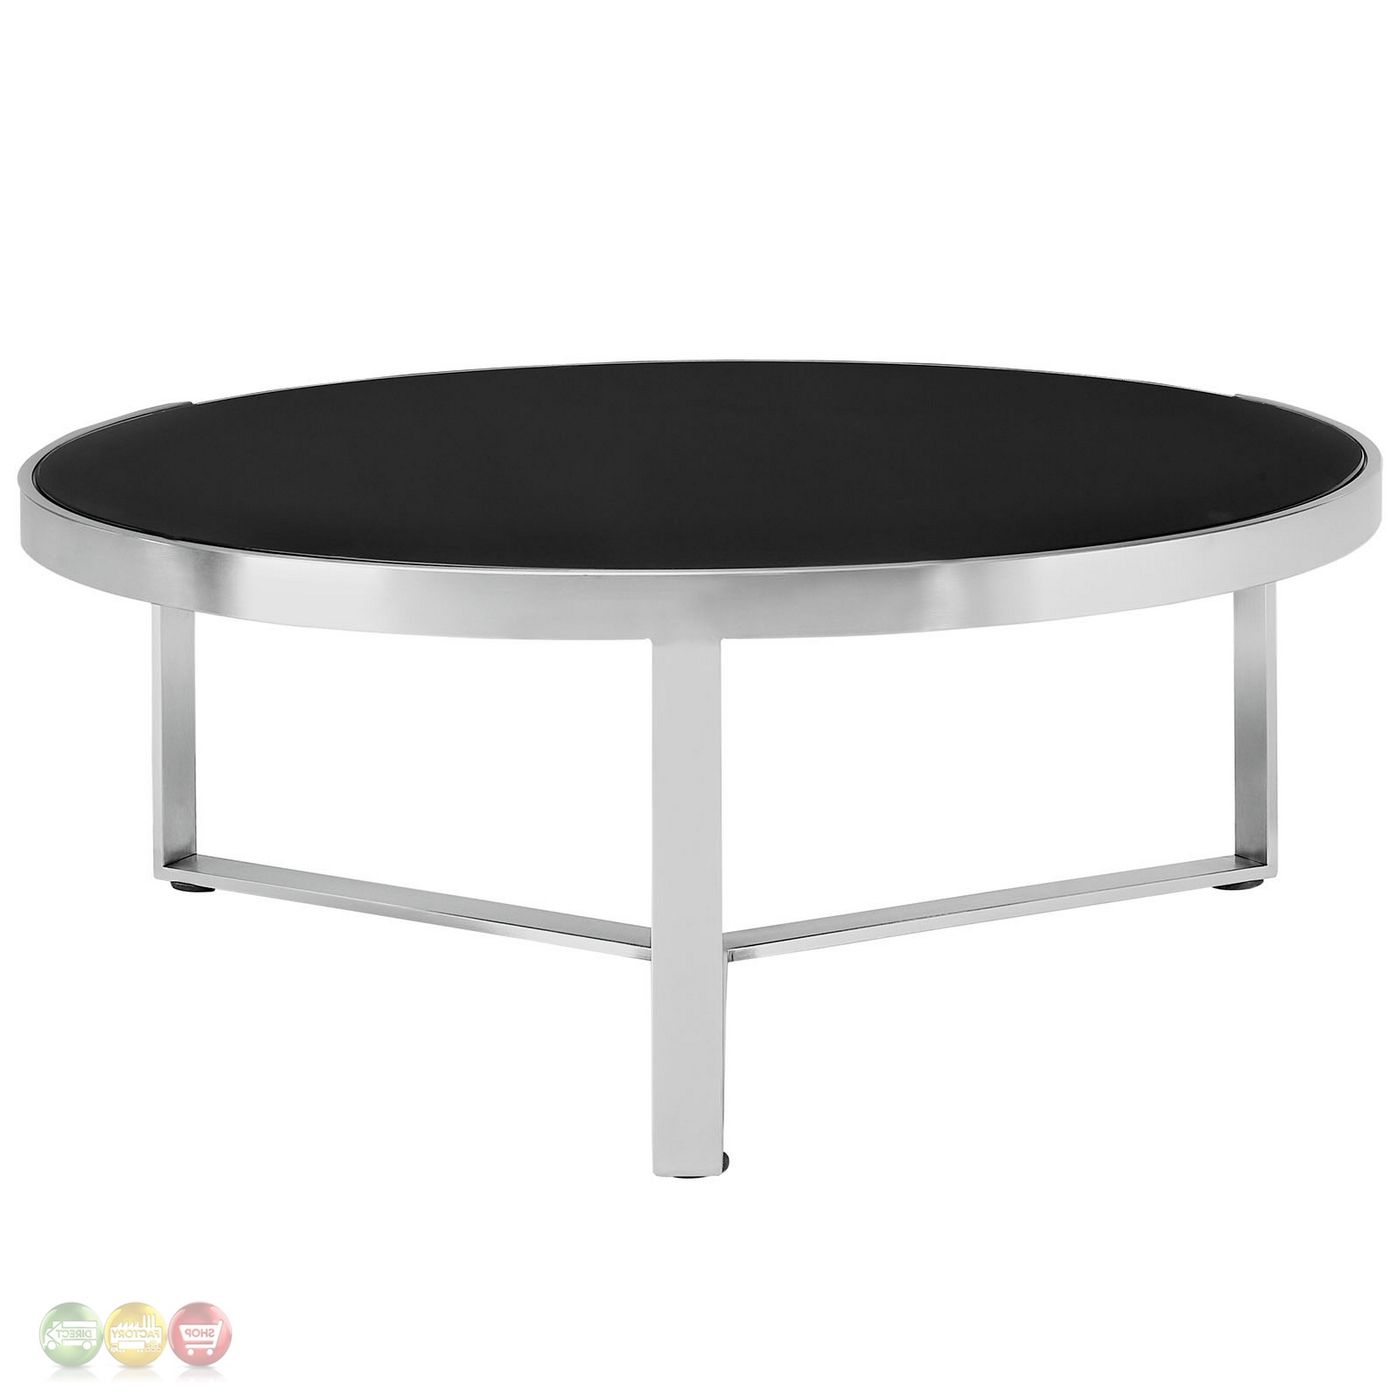 Best And Newest Black Round Glass Top Cocktail Tables With Disk Industrial Glass Top Round Coffee Table W/stainless (View 12 of 20)